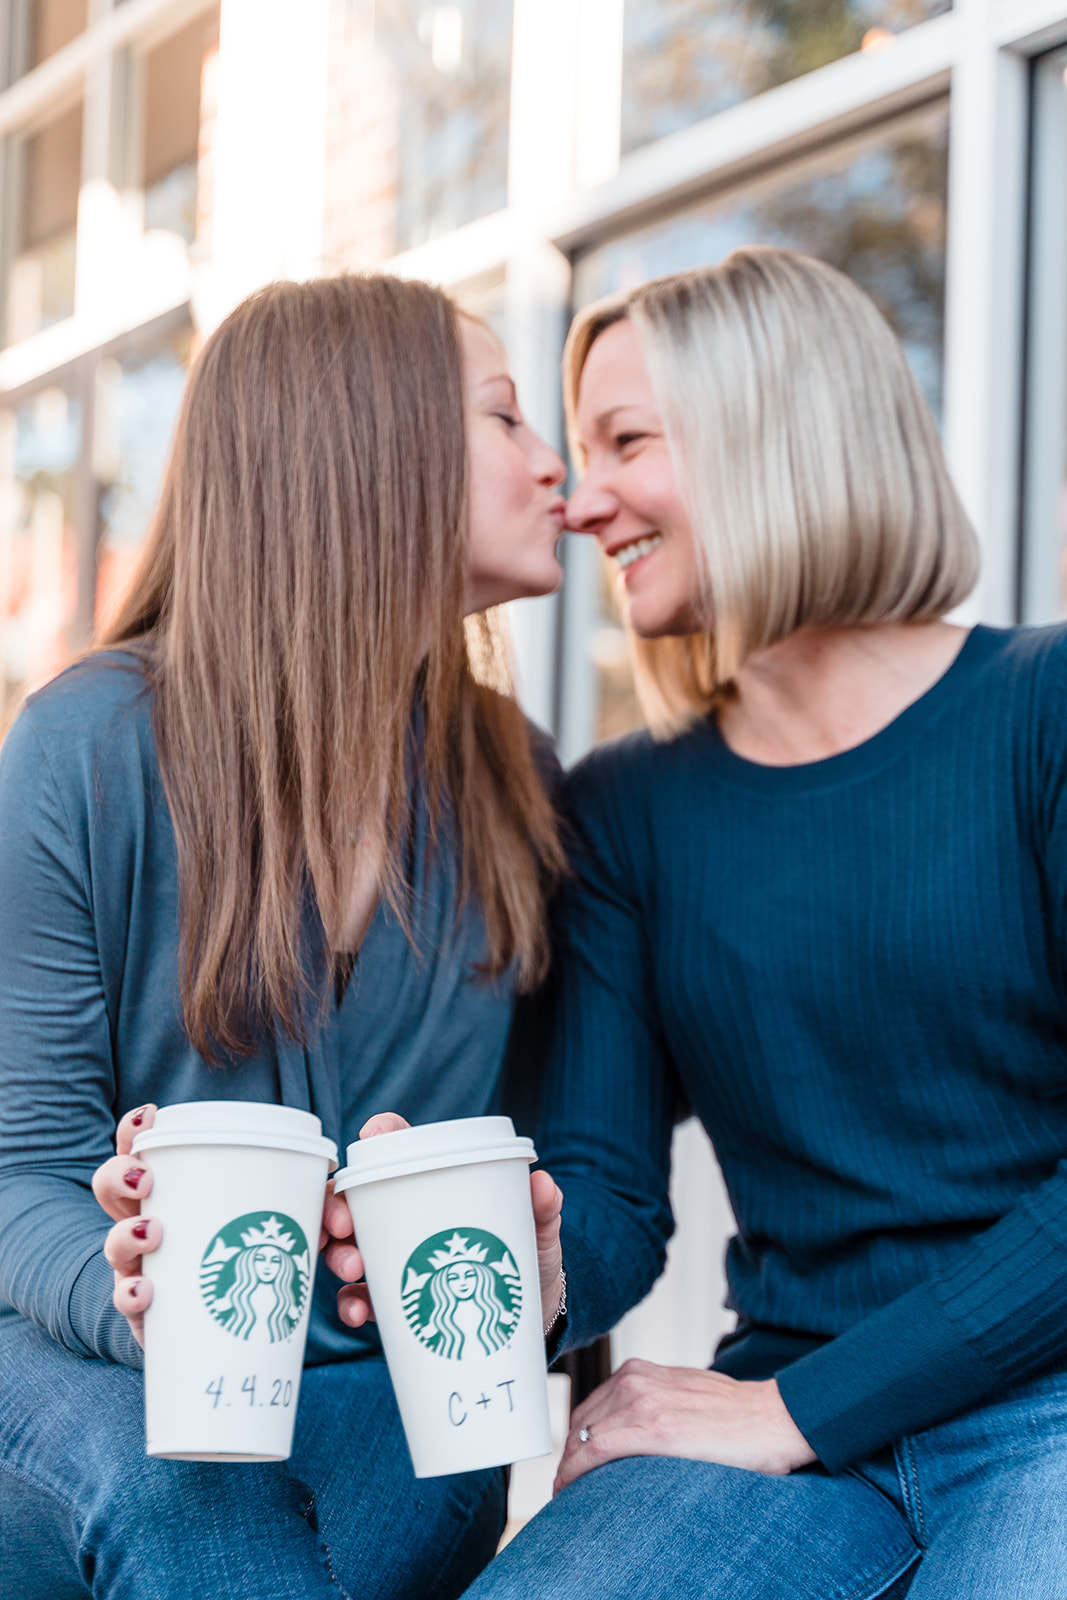 Two brides-to-be sit together, one kissing the other on the nose, while they hold Starbucks coffee cups adorned with their initials and the wedding date.